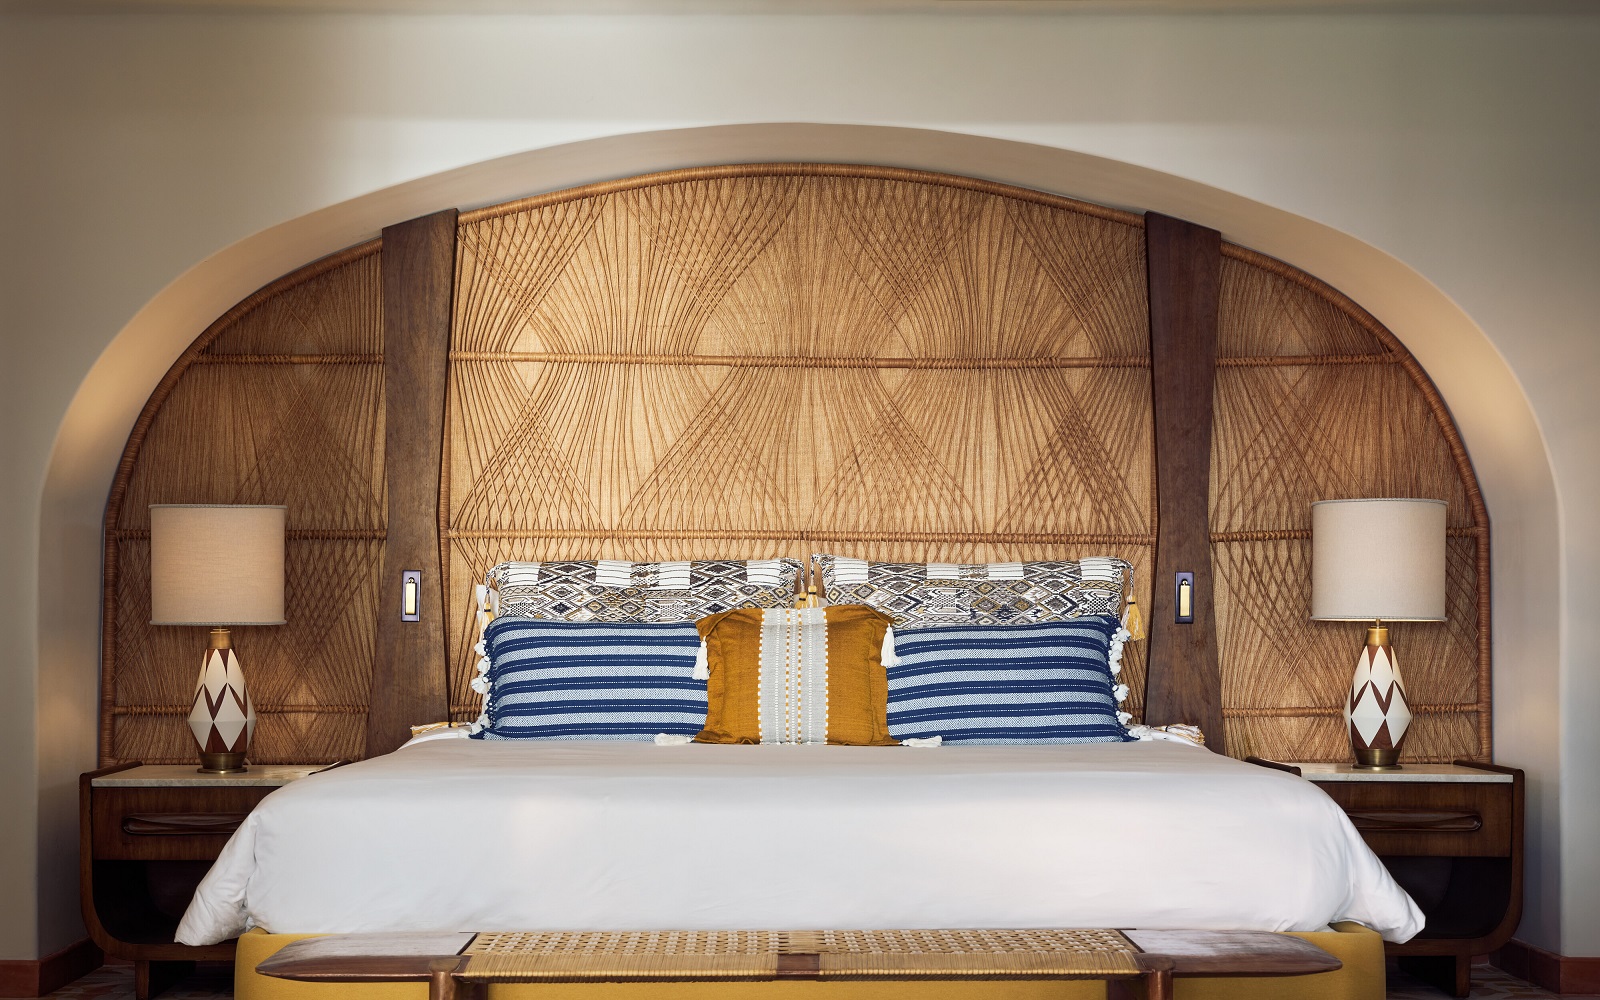 Maroma hotel bed set into arched alcove with a wicker woven headboard behind, blue striped pillows and ceramic bedside lamps